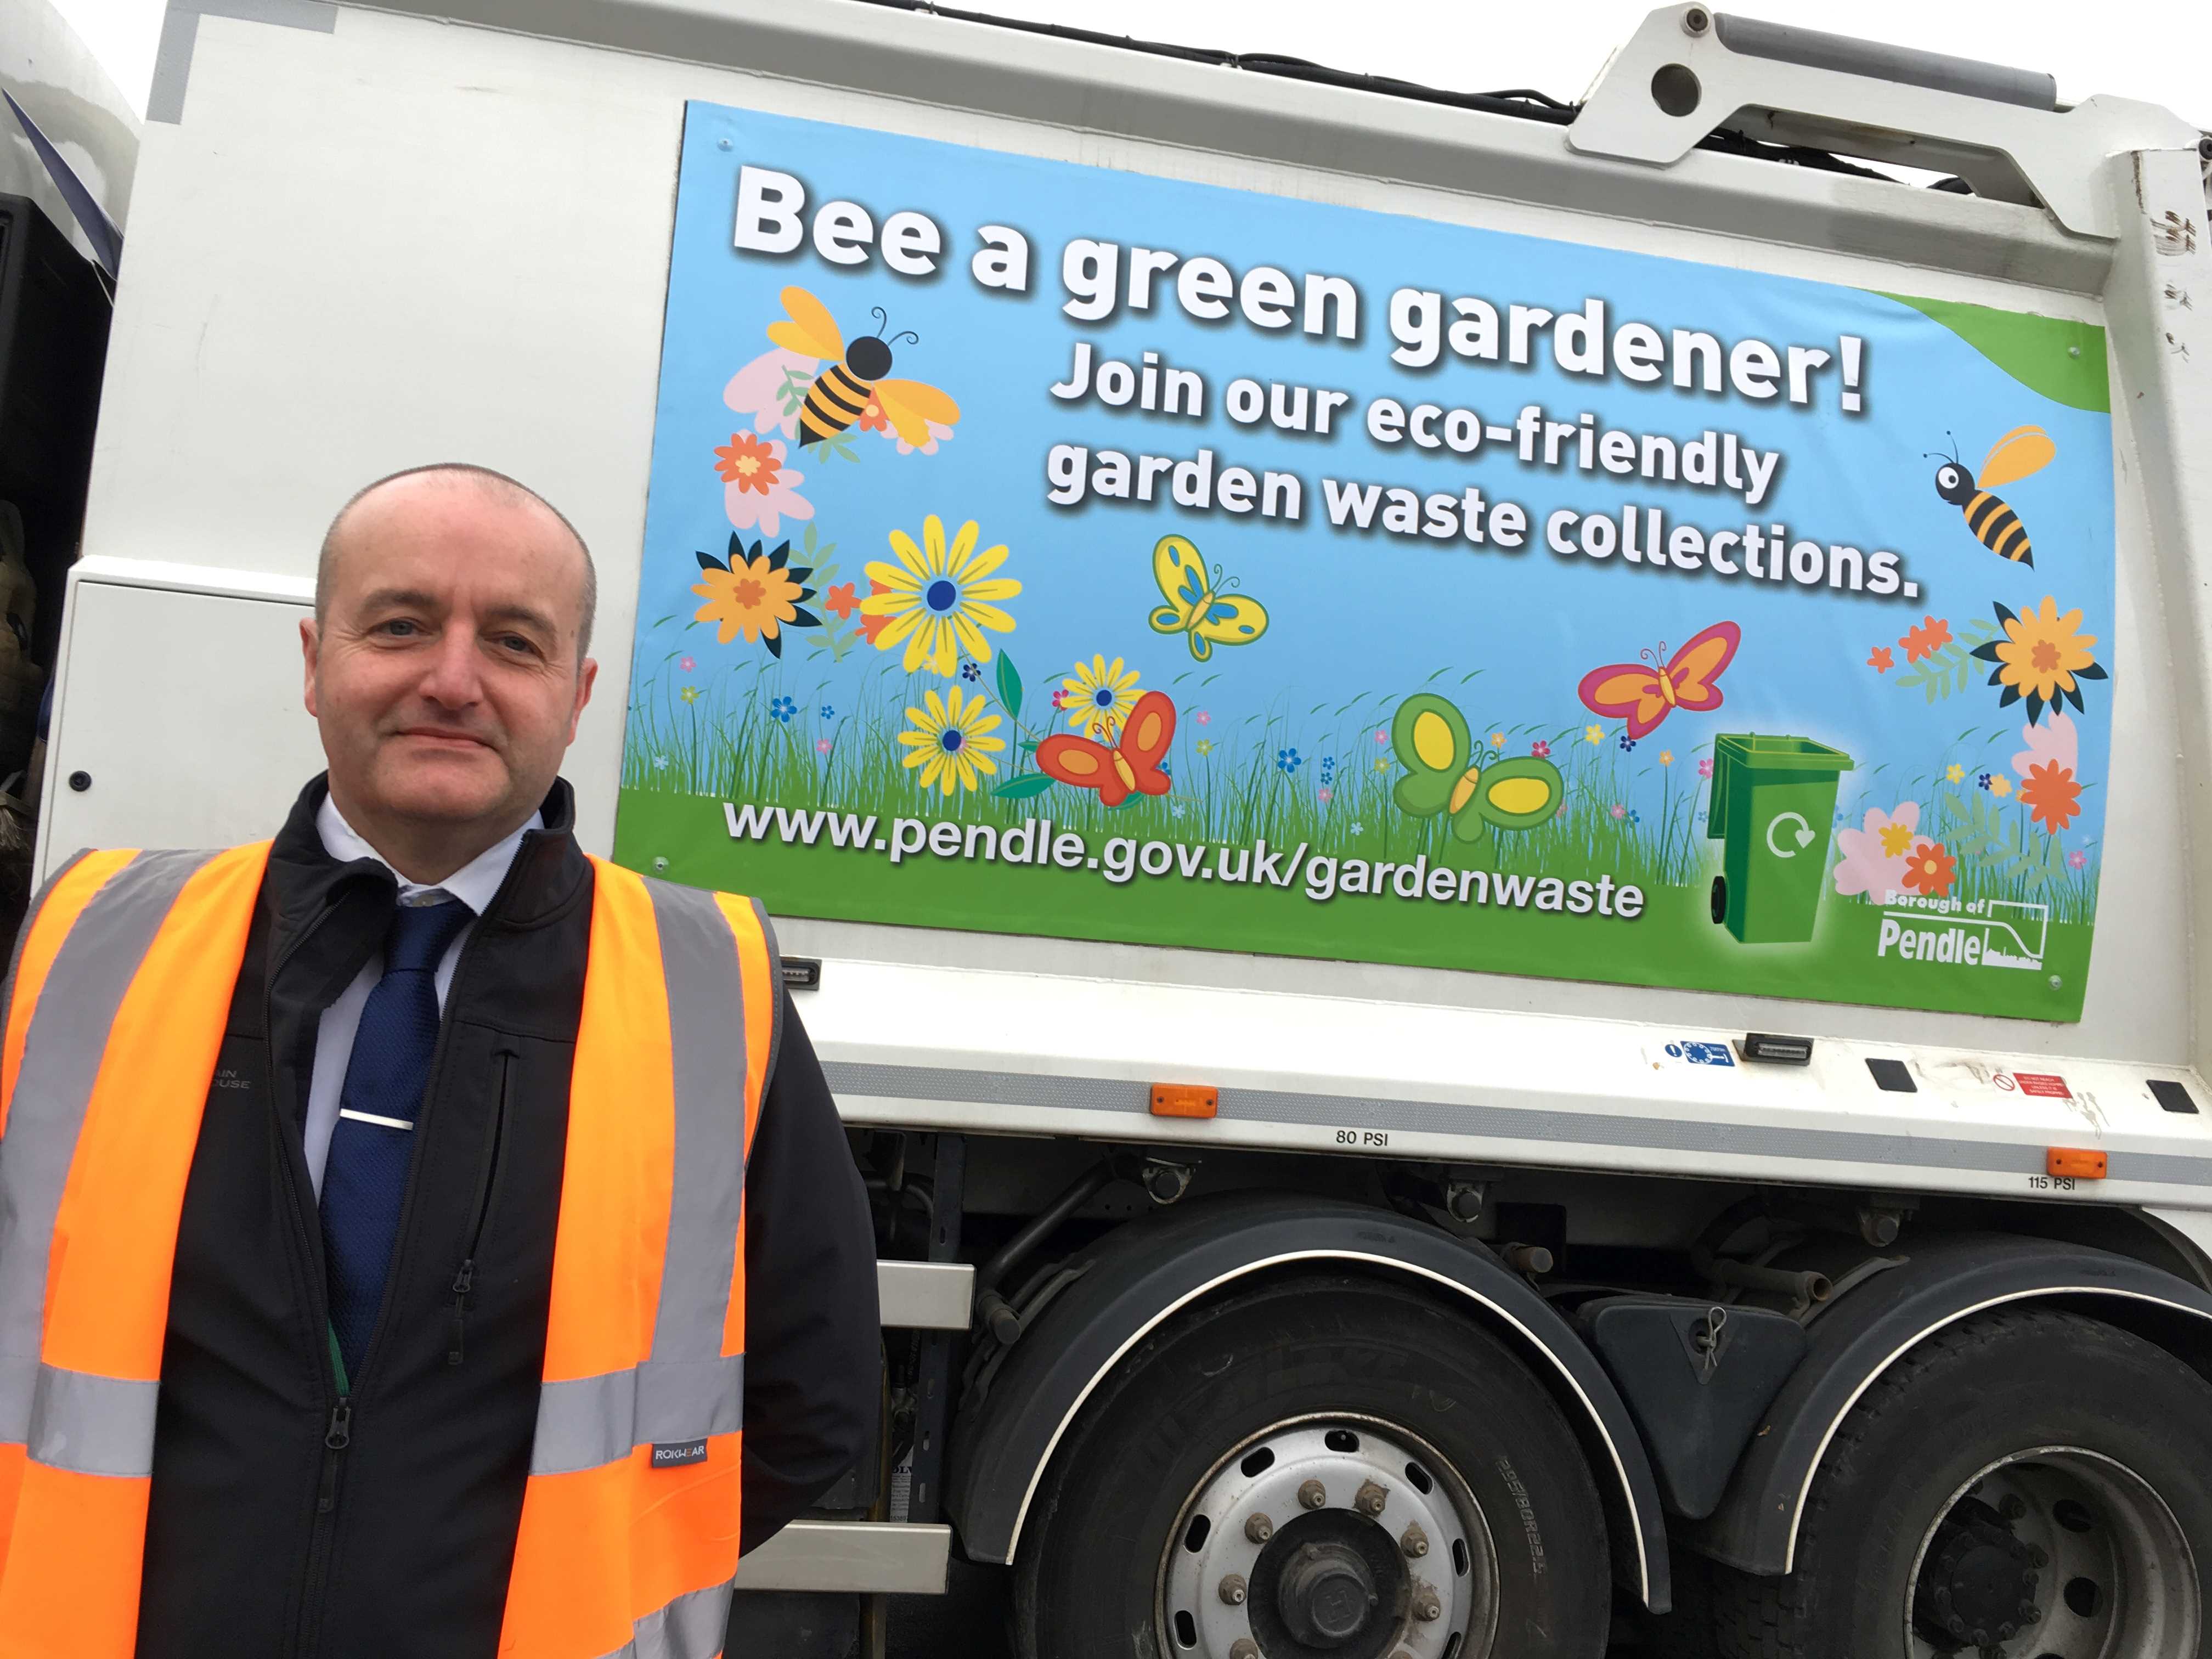 Bee a green gardener – sign up for garden waste collections!